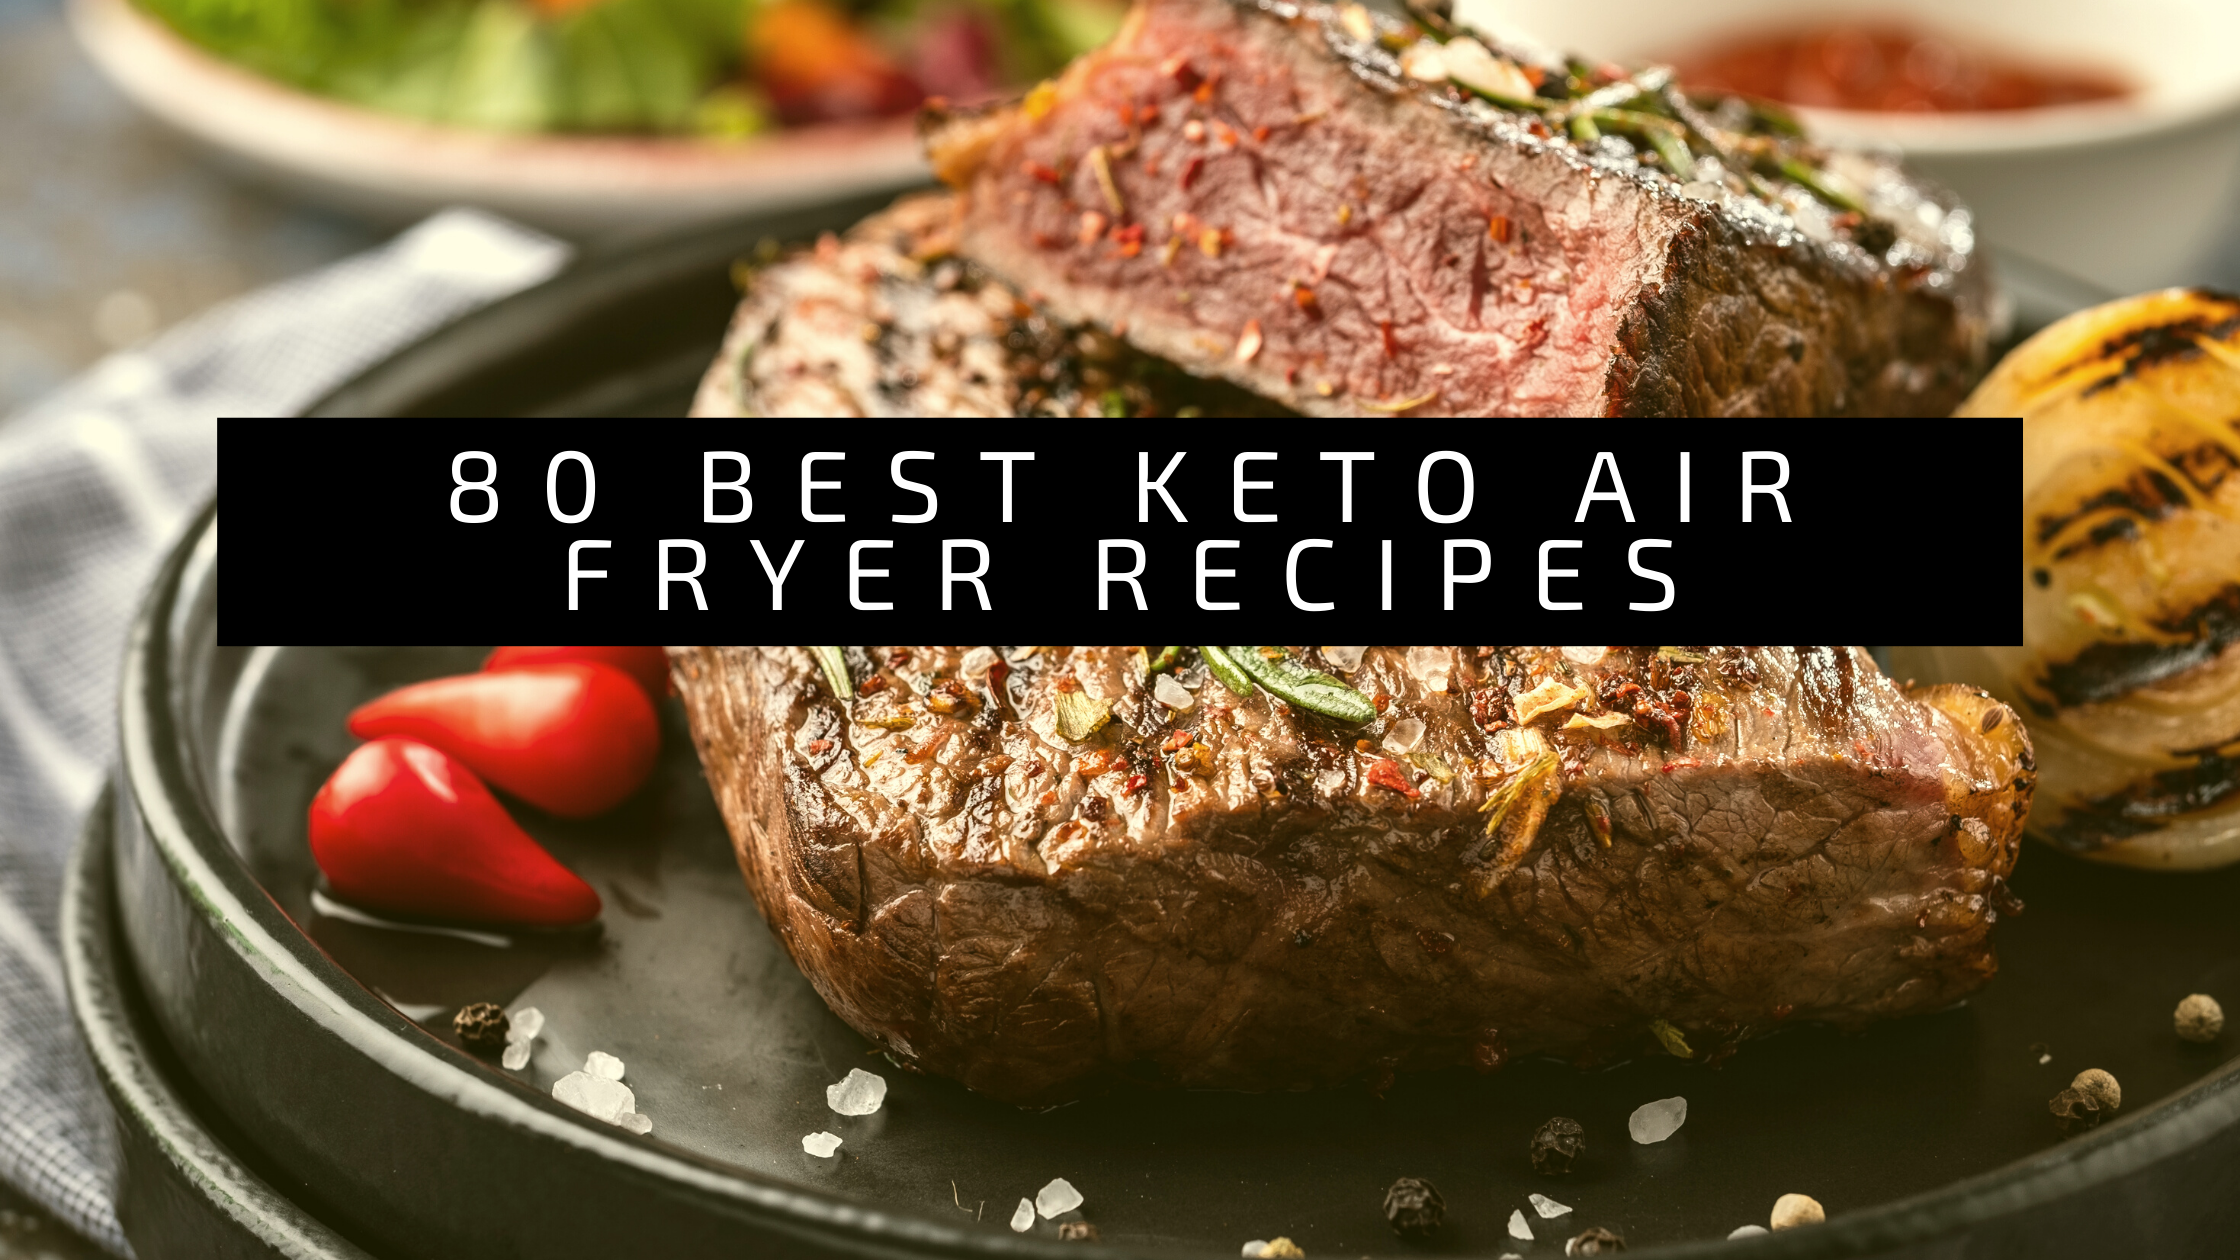 40 Family-Friendly Keto Air Fryer Recipes for Quick and Delicious Meals 56